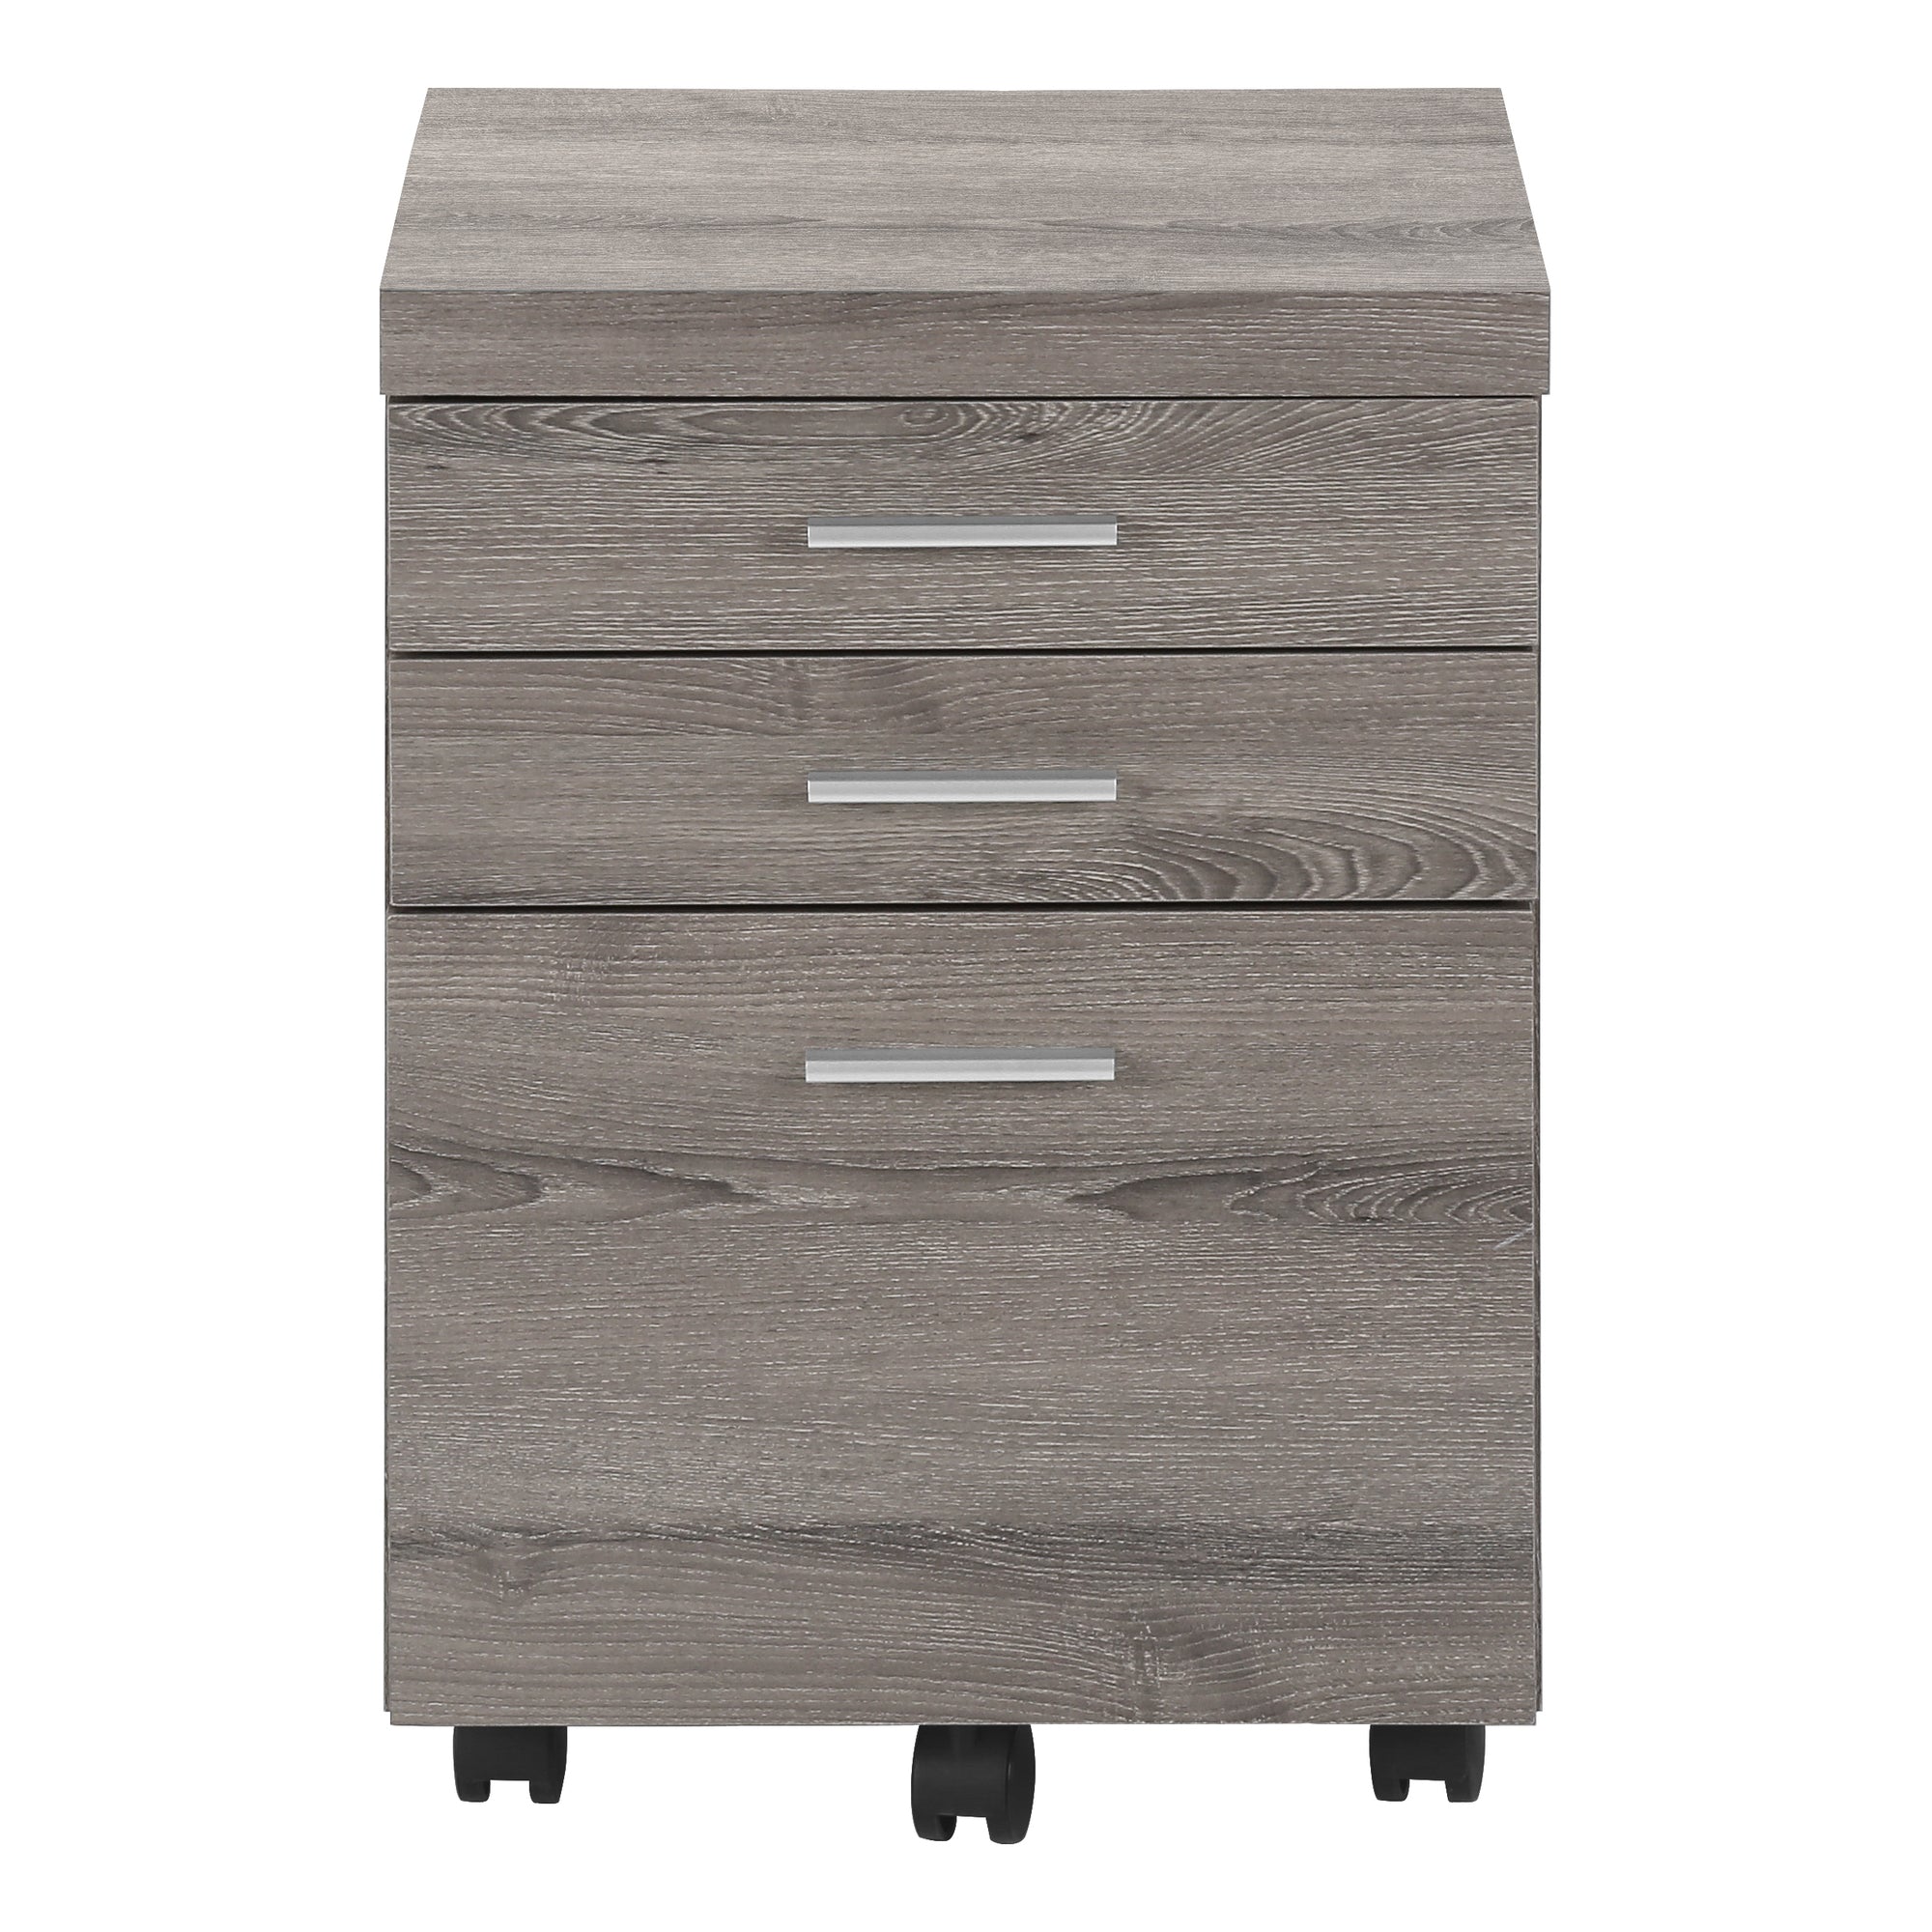 MN-837049    File Cabinet, Rolling Mobile, Storage, Printer Stand, Wood File Cabinet, Office, Mdf, Dark Taupe, Contemporary, Modern